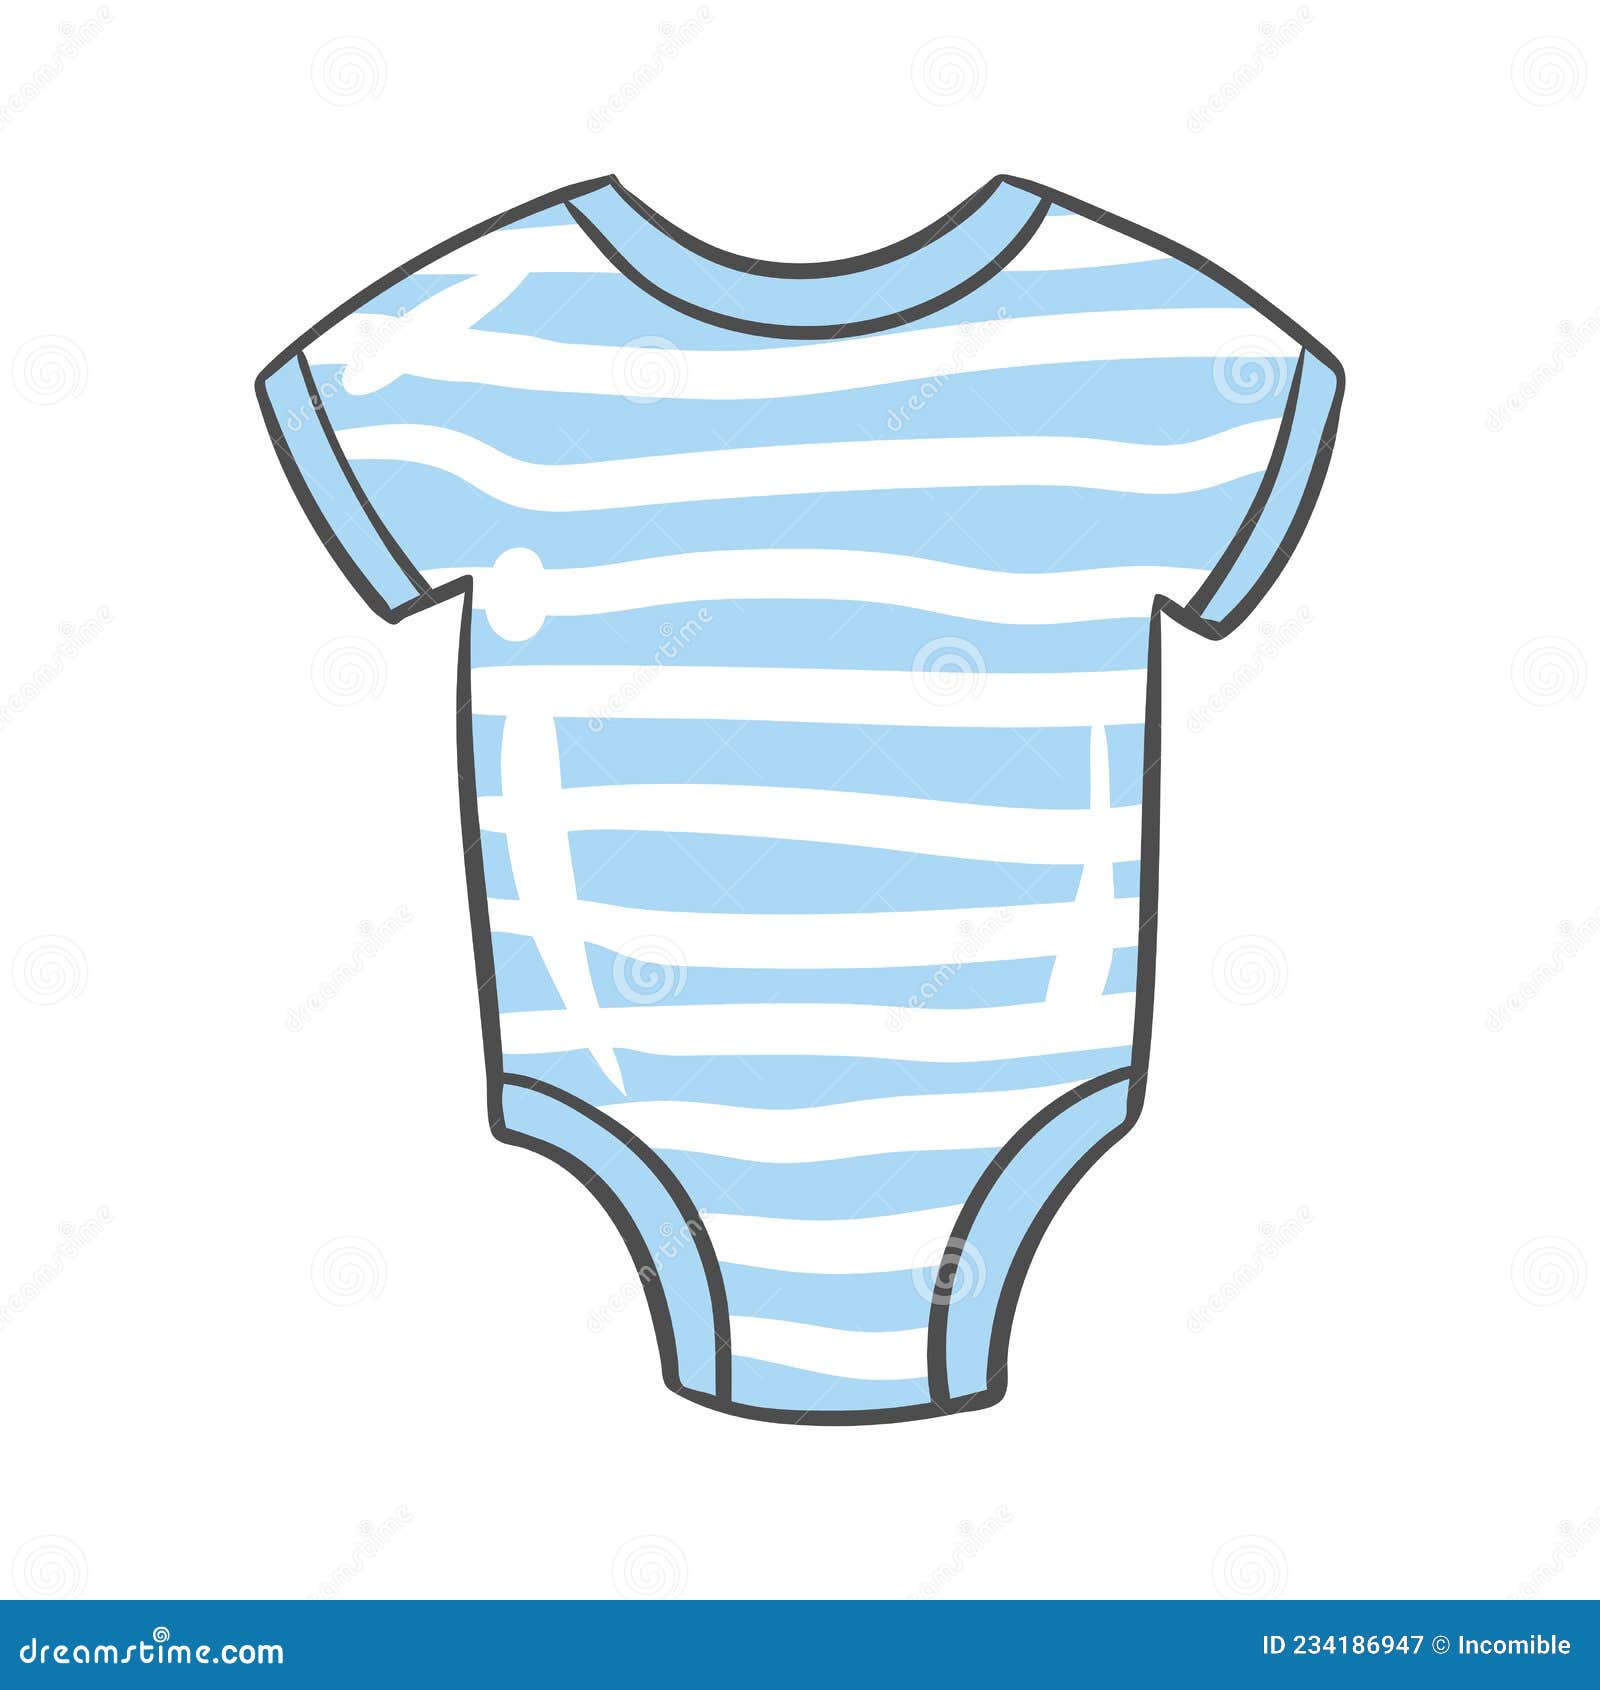 Illustration of Baby Suit. Clothes for Newborn. Happy Birthday Image ...